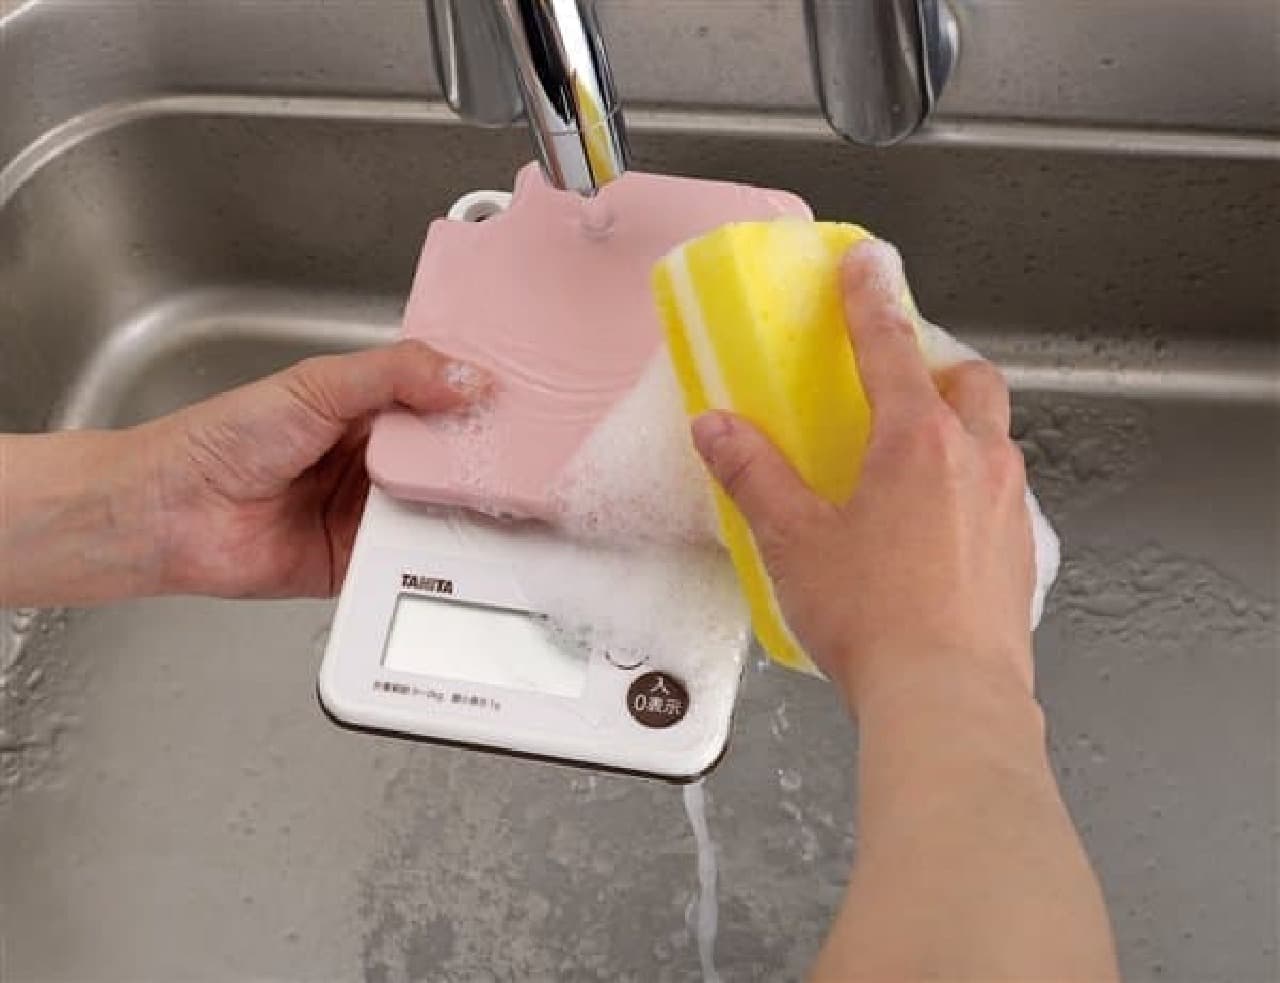 Kitchen scale that can be washed completely